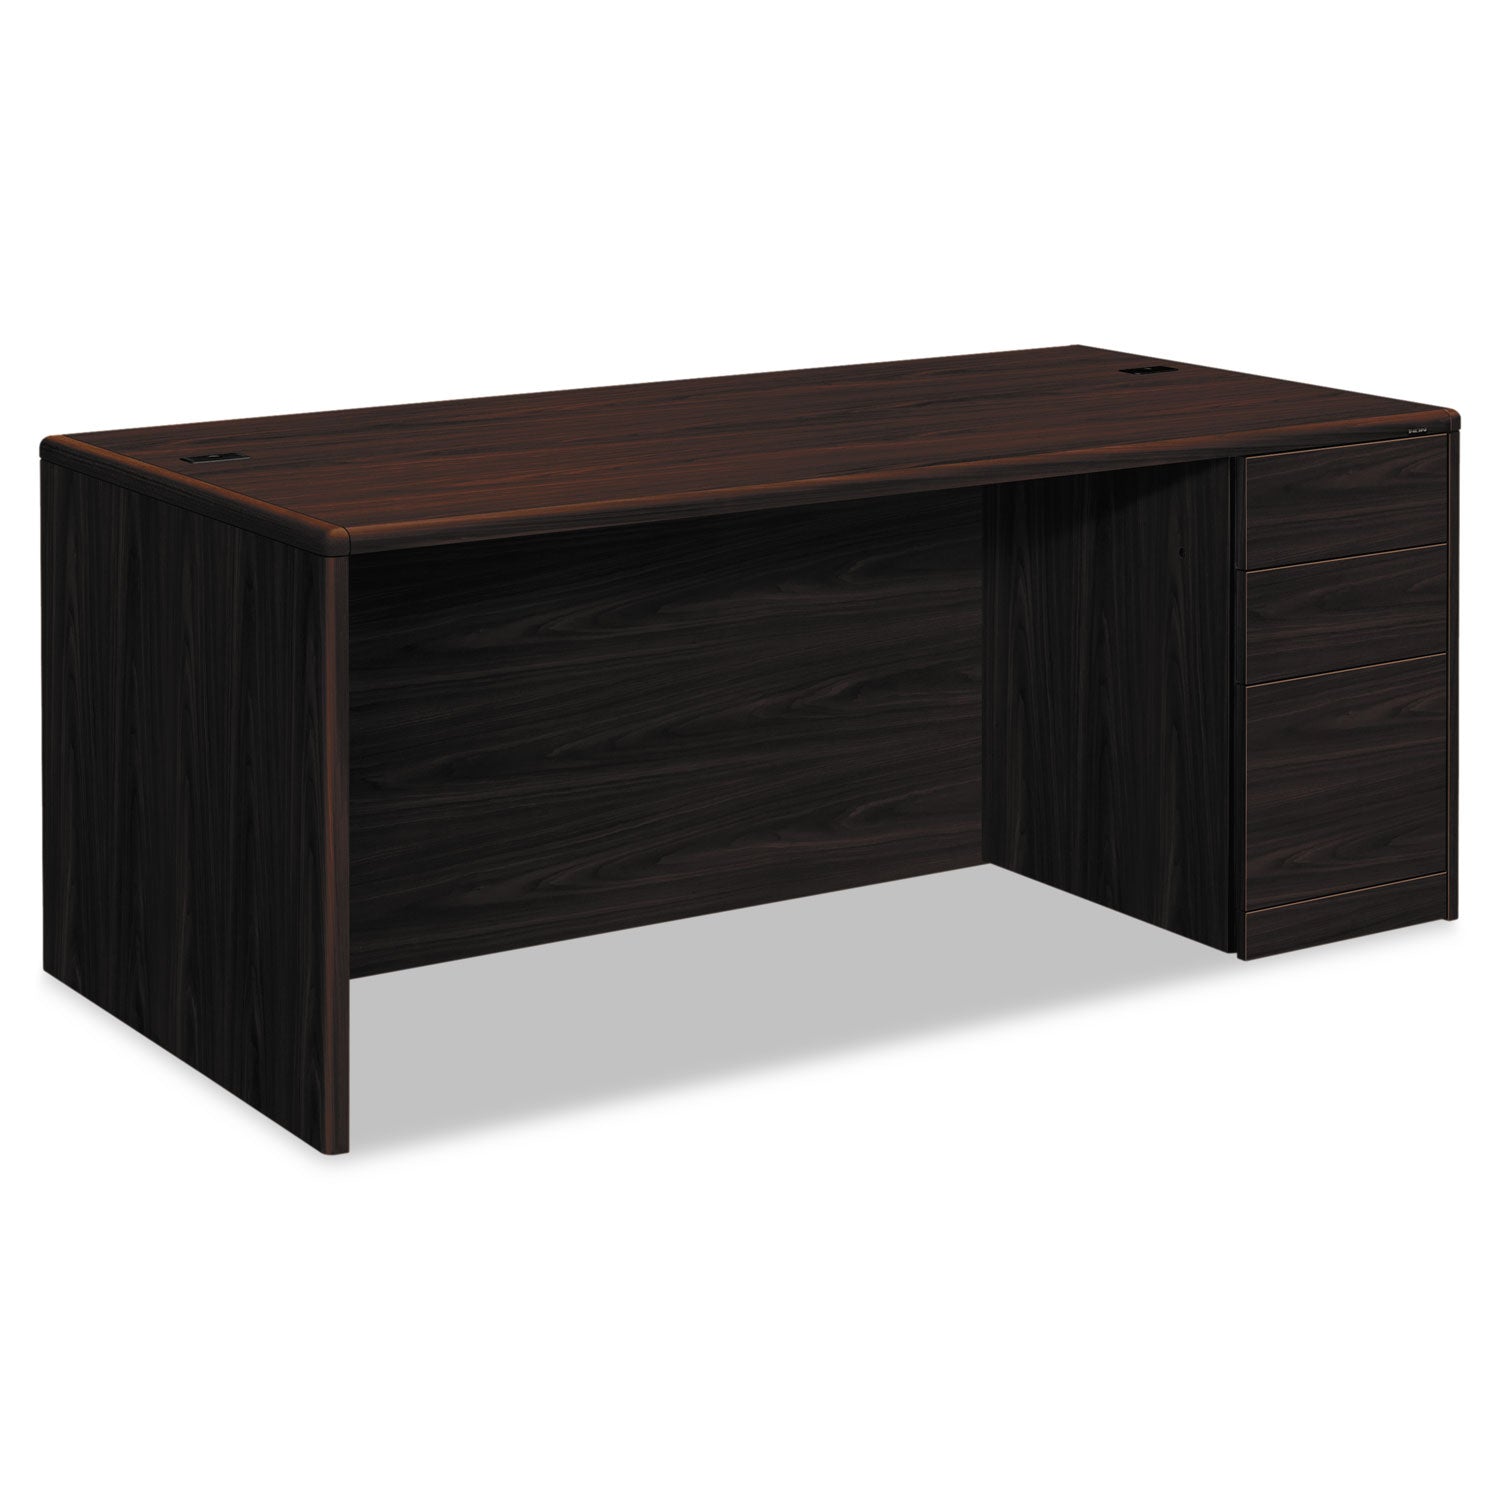 10700 Series Single Pedestal Desk with Full-Height Pedestal on Right, 72" x 36" x 29.5", Mahogany - 